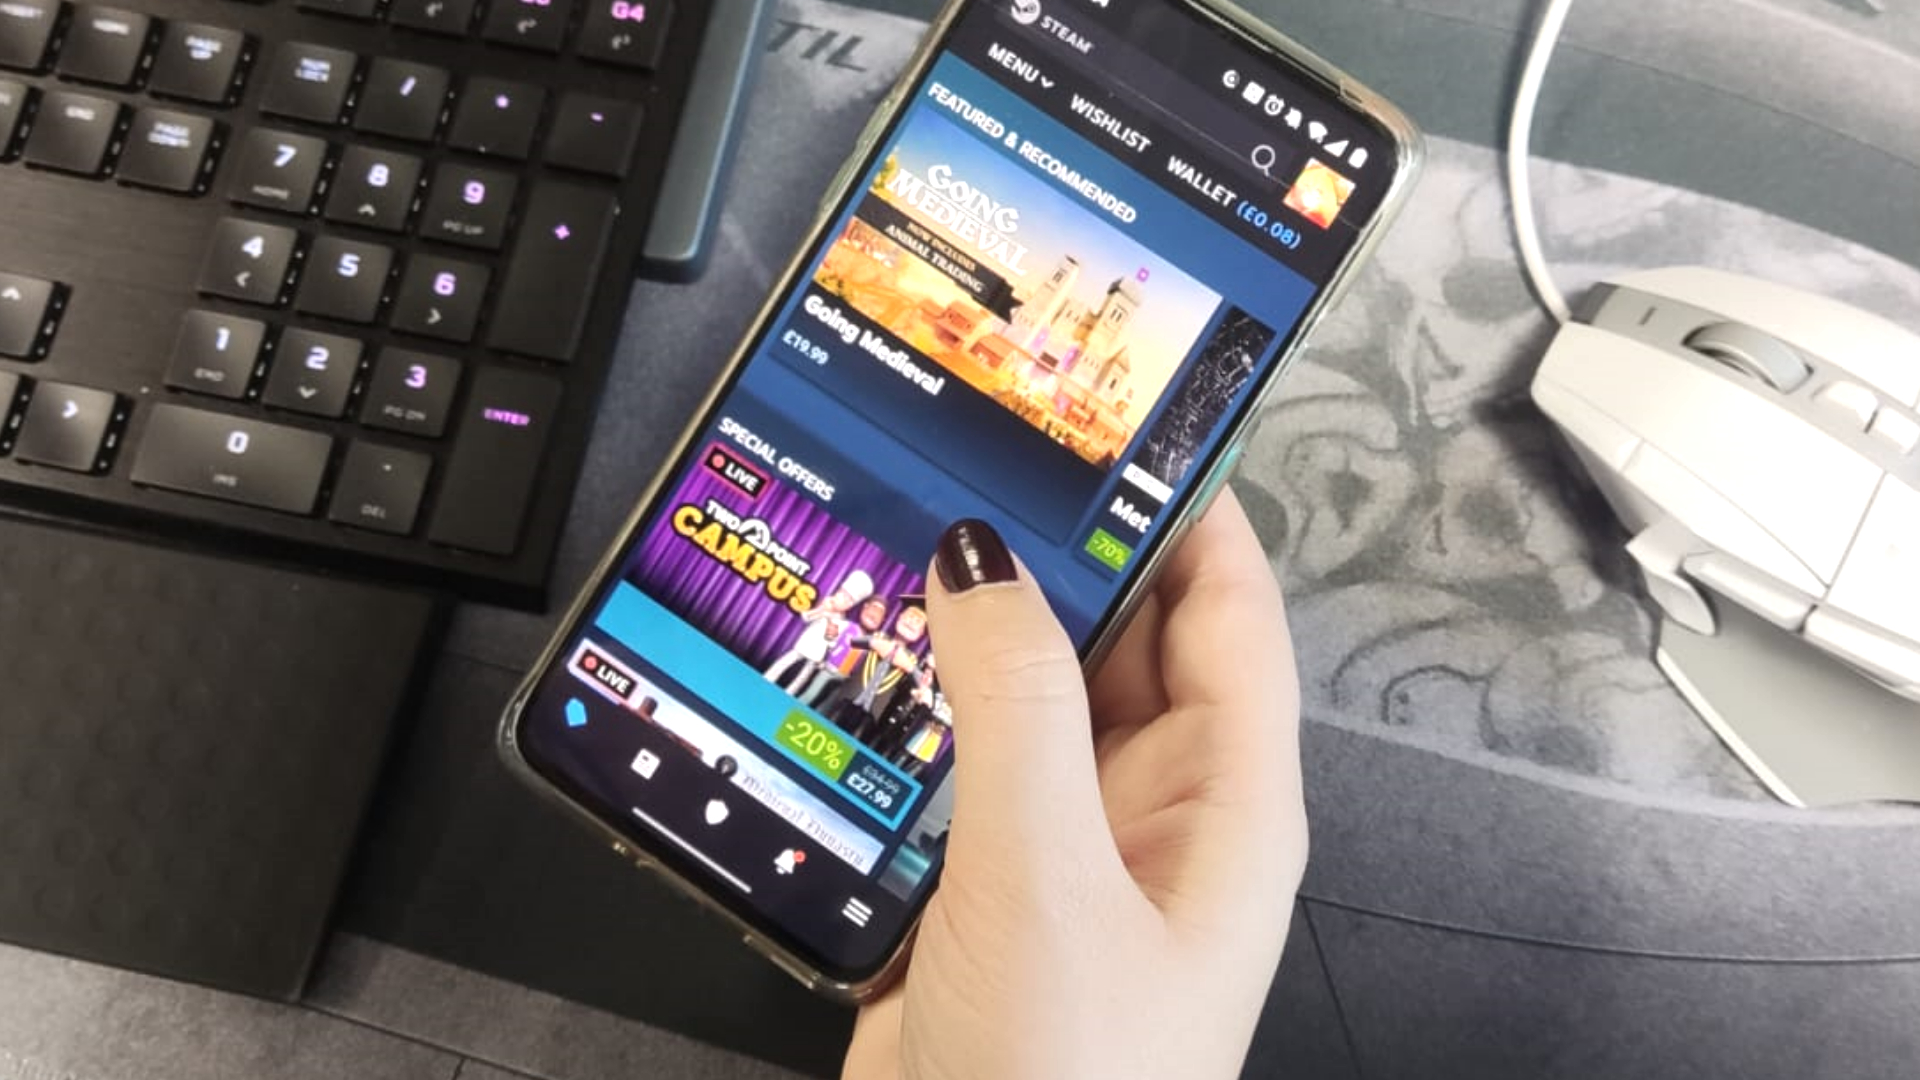 Steam Mobile App Now Available on iOS and Android